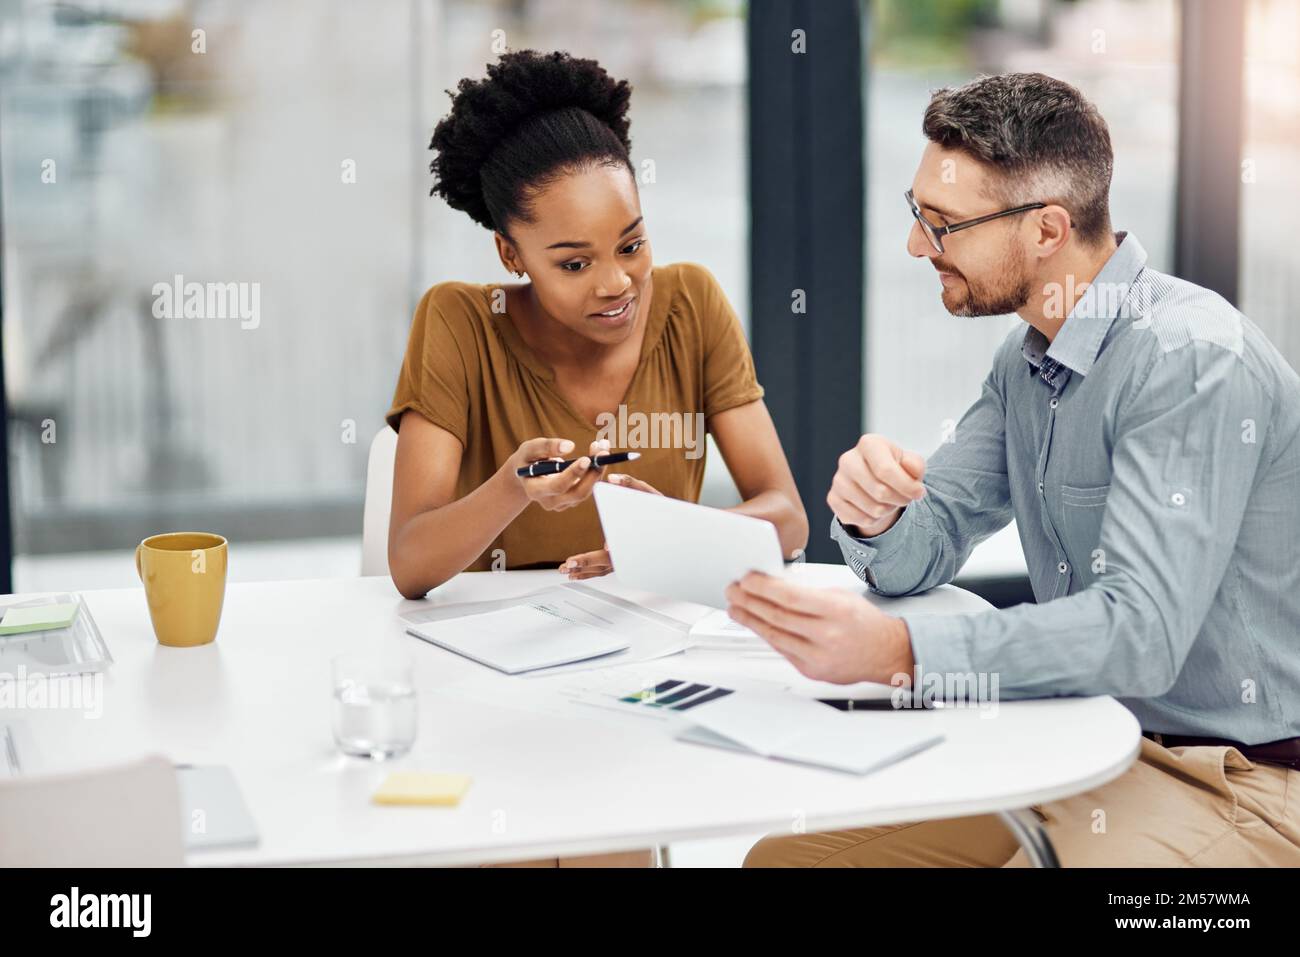 Theyre a winning team. two businesspeople working together in their office. Stock Photo